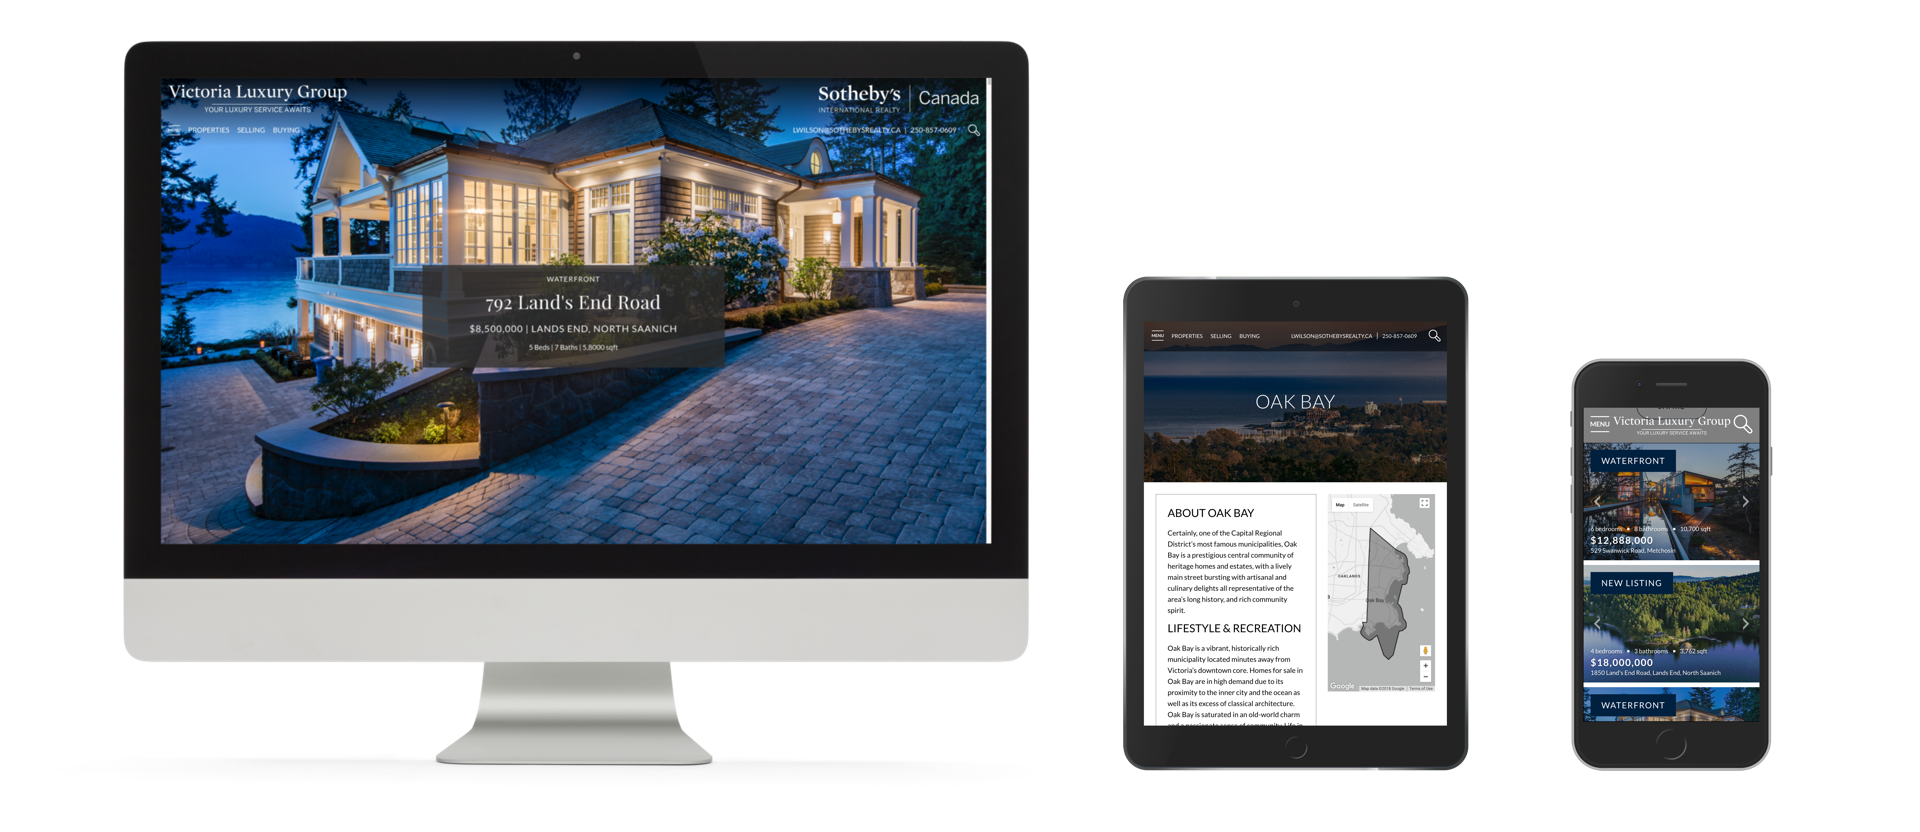 Vancouver Island Real Estate Website design for responsive devices